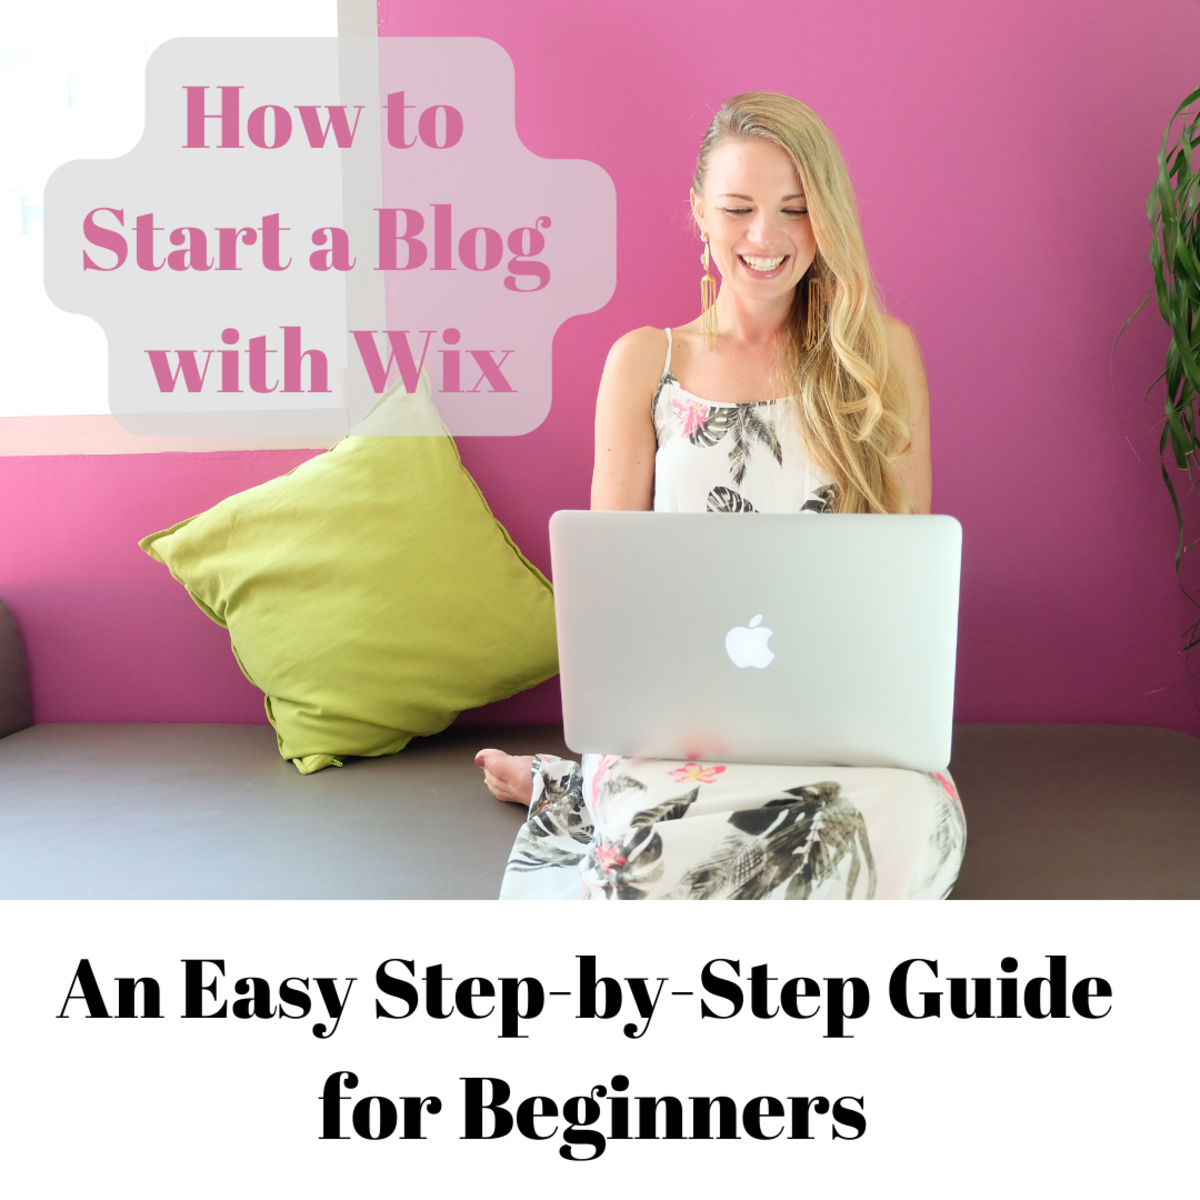 How to Start a Blog With Wix: (A Step-by-Step Beginner's Guide)